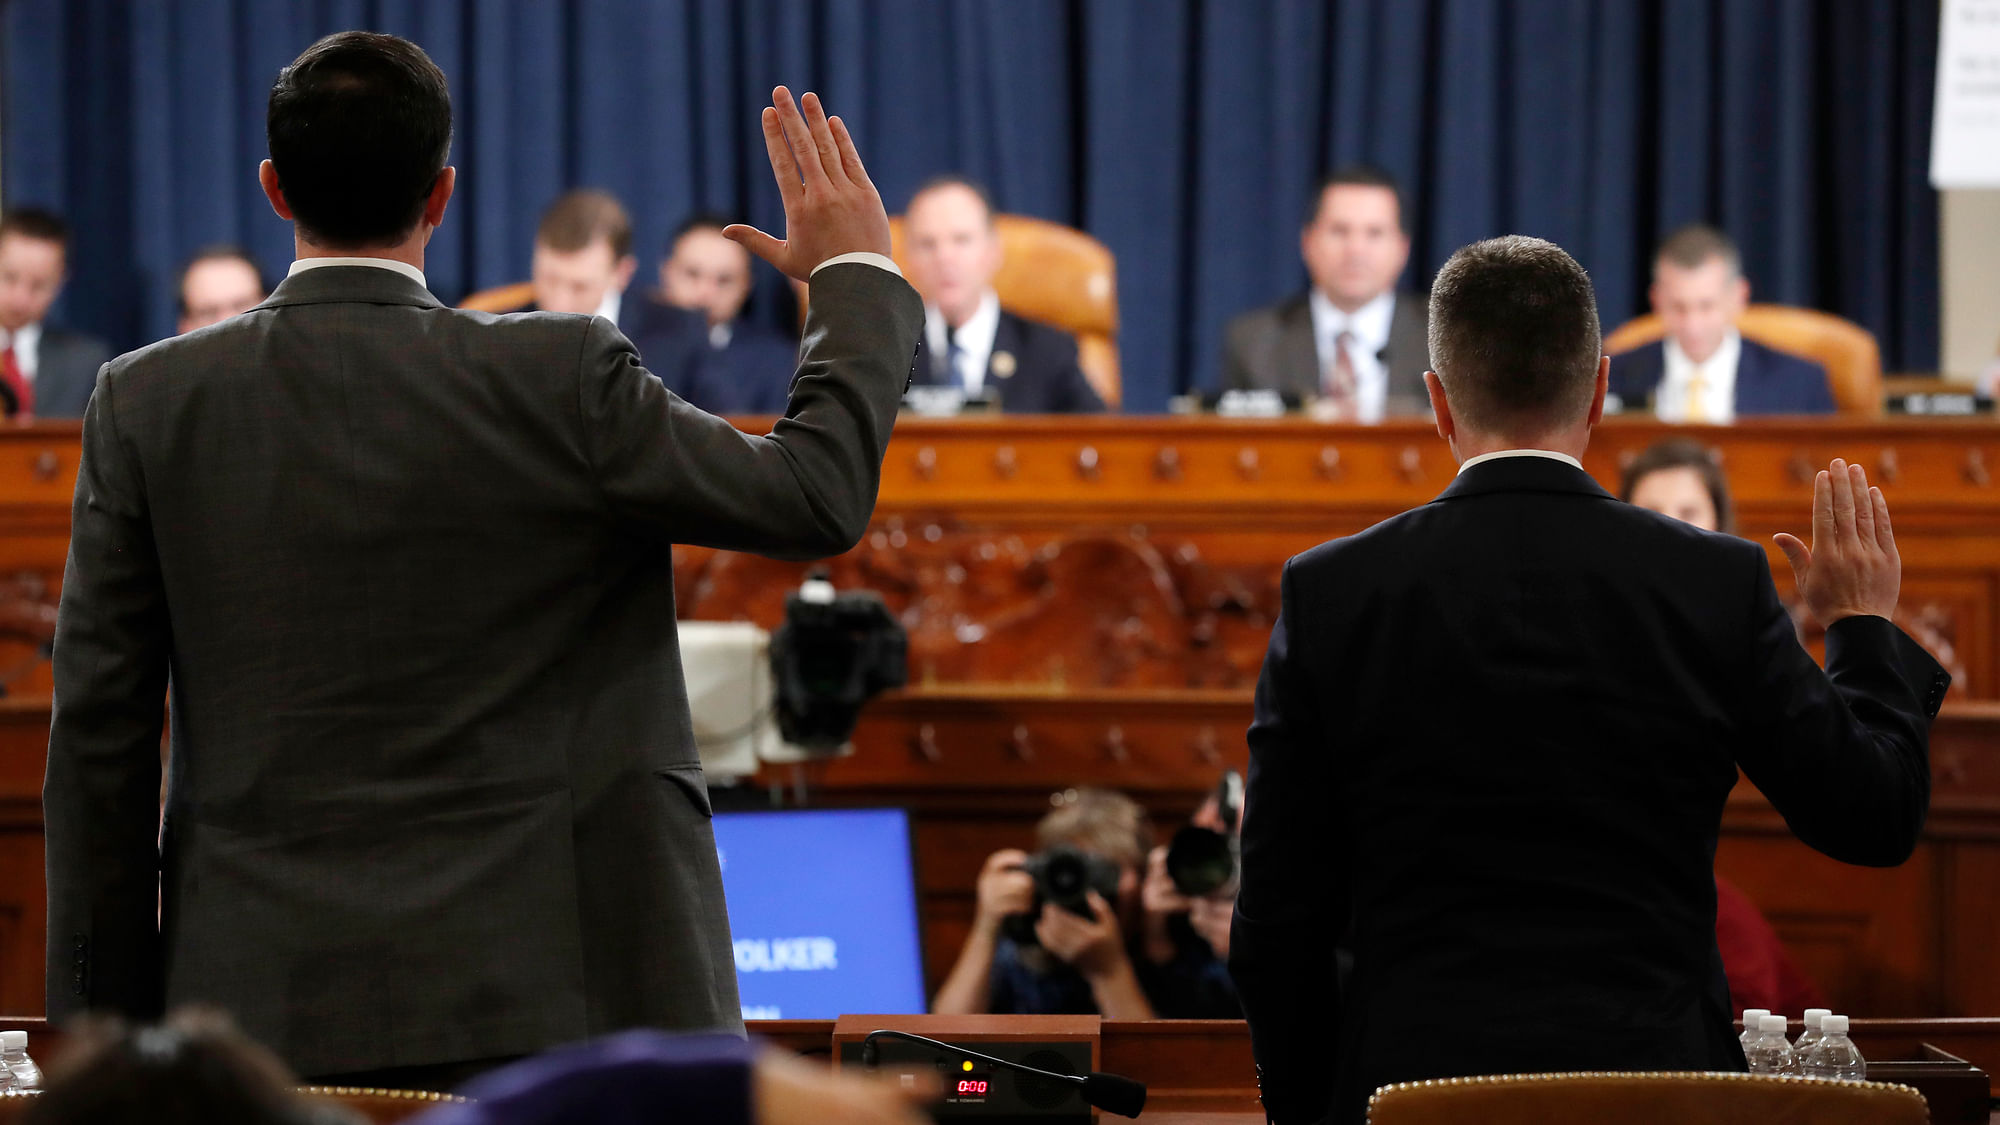 Ambassador Kurt Volker, right, former special envoy to Ukraine, and Tim Morrison, a former official at the National Security Council are sworn in to testify before the House Intelligence Committee on Capitol Hill in Washington.